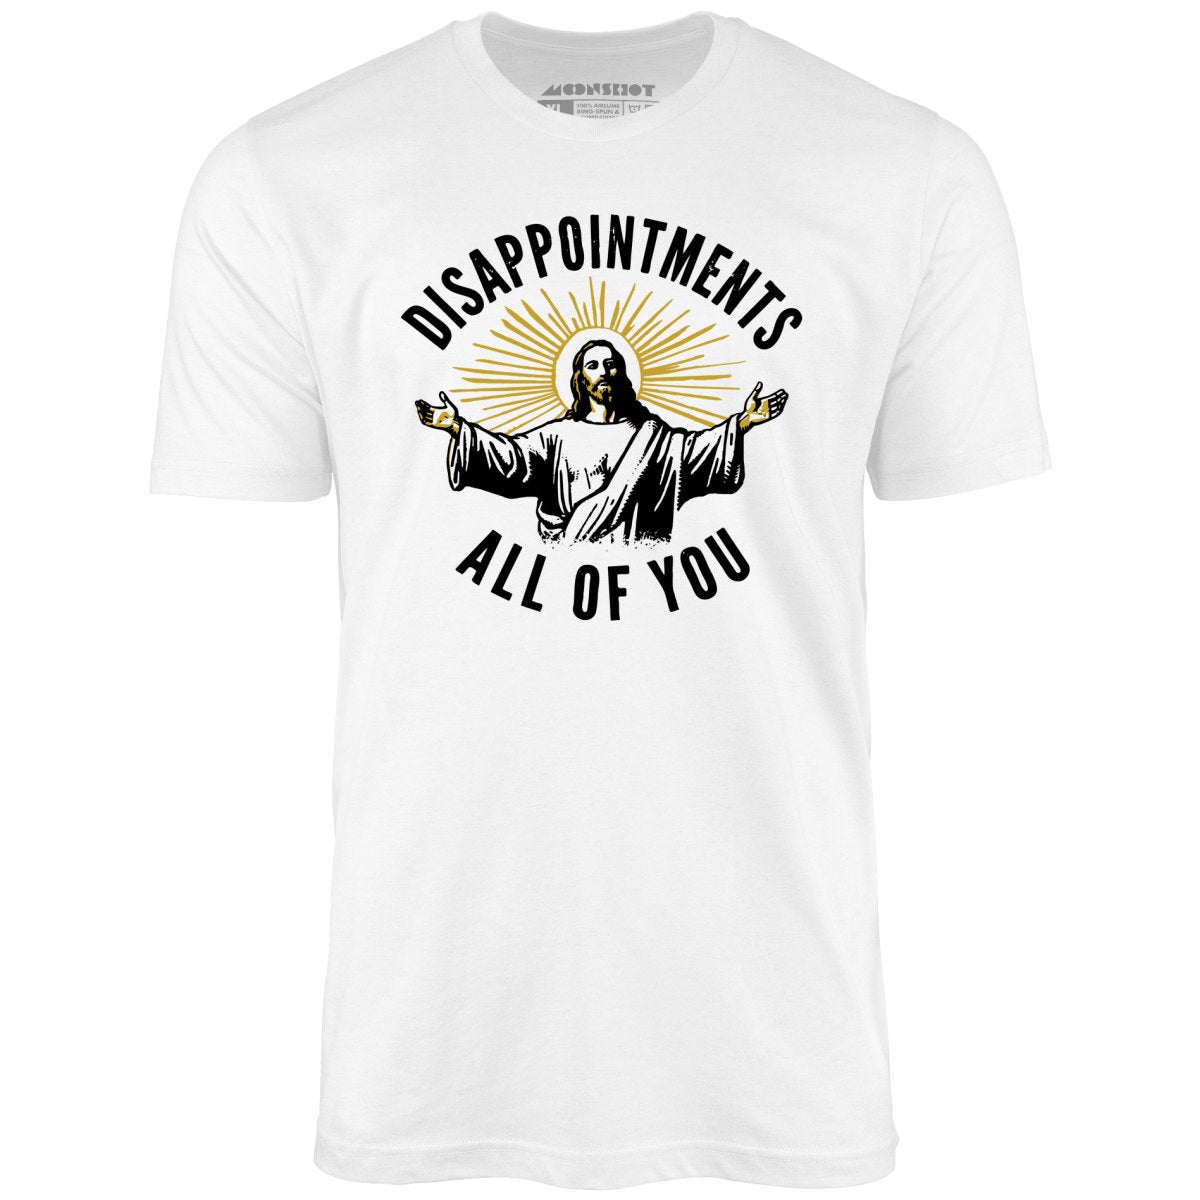 Disappointments All of You - Unisex T-Shirt